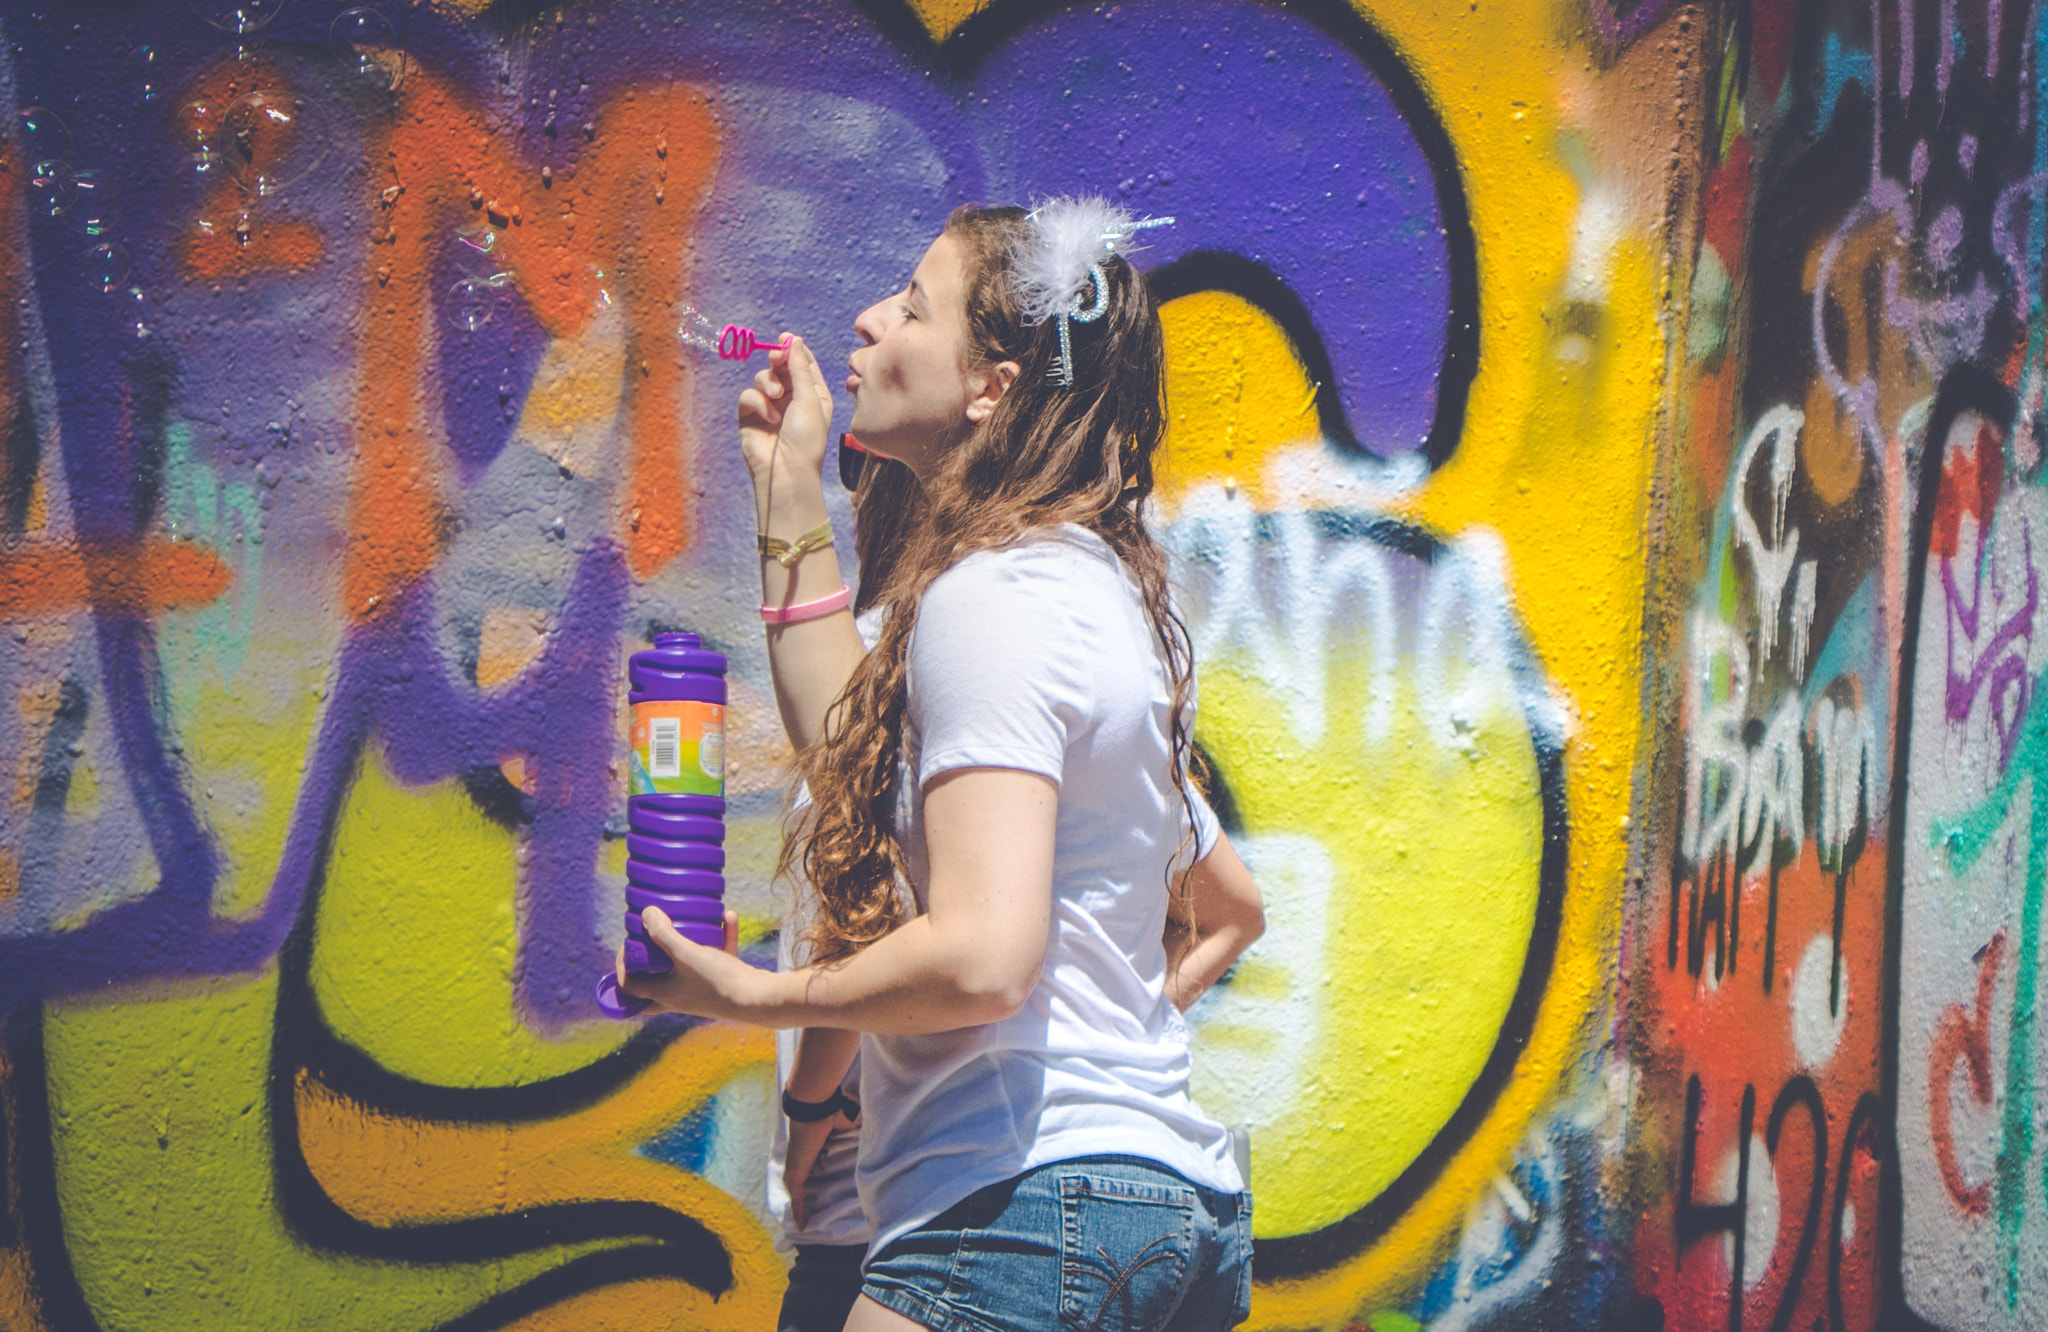 Sony ILCA-77M2 + Tamron SP 24-70mm F2.8 Di VC USD sample photo. Girl blowing bubbles at graffiti park photography